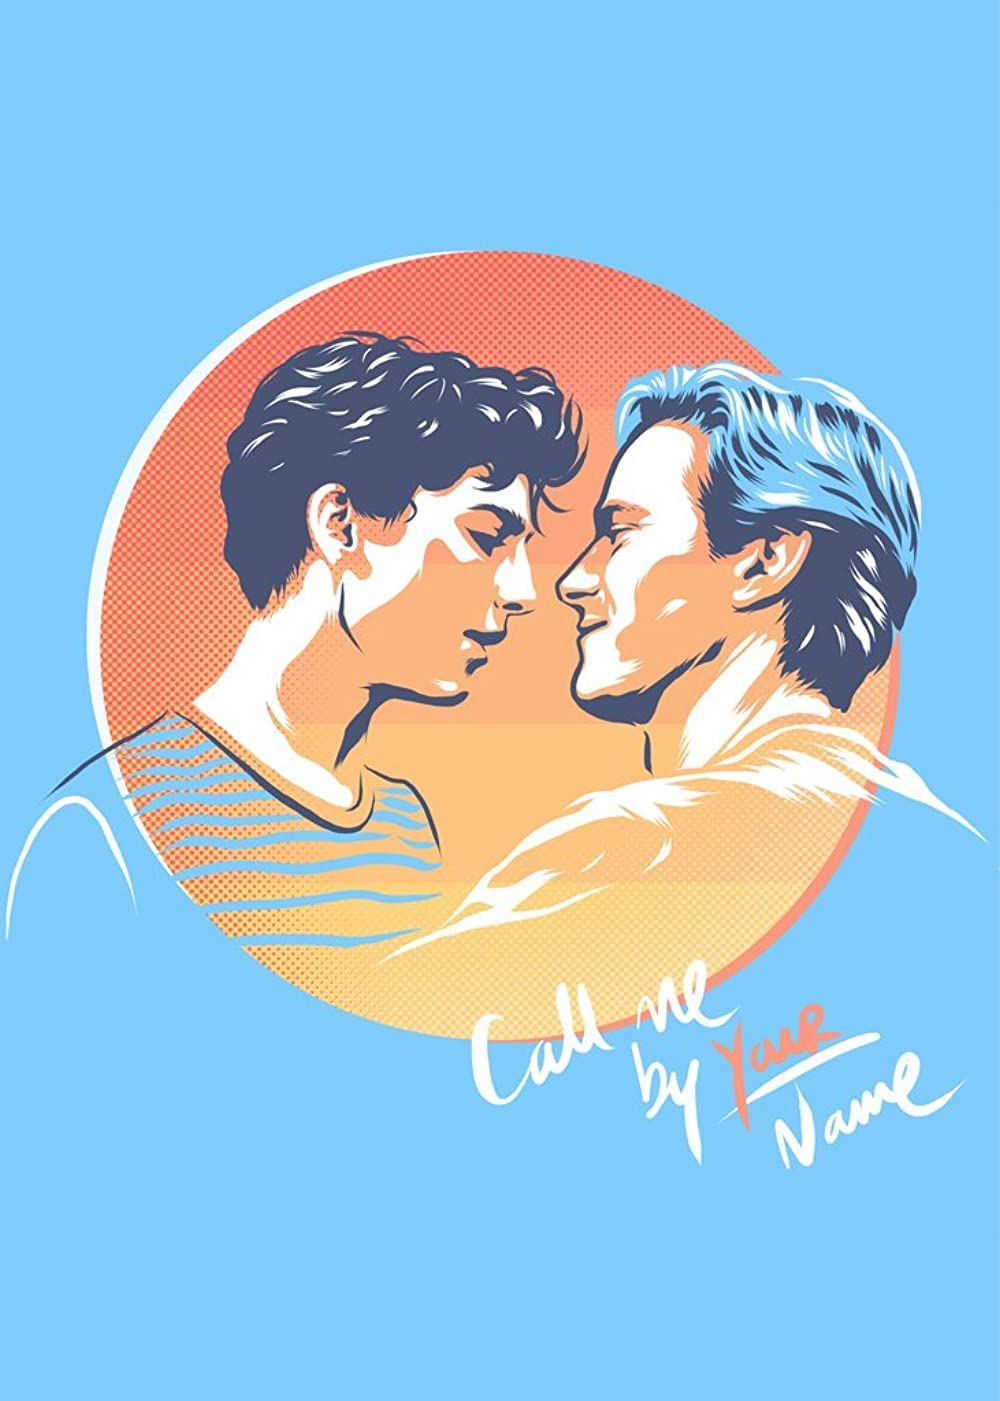 Call Me By Your Name Wallpapers